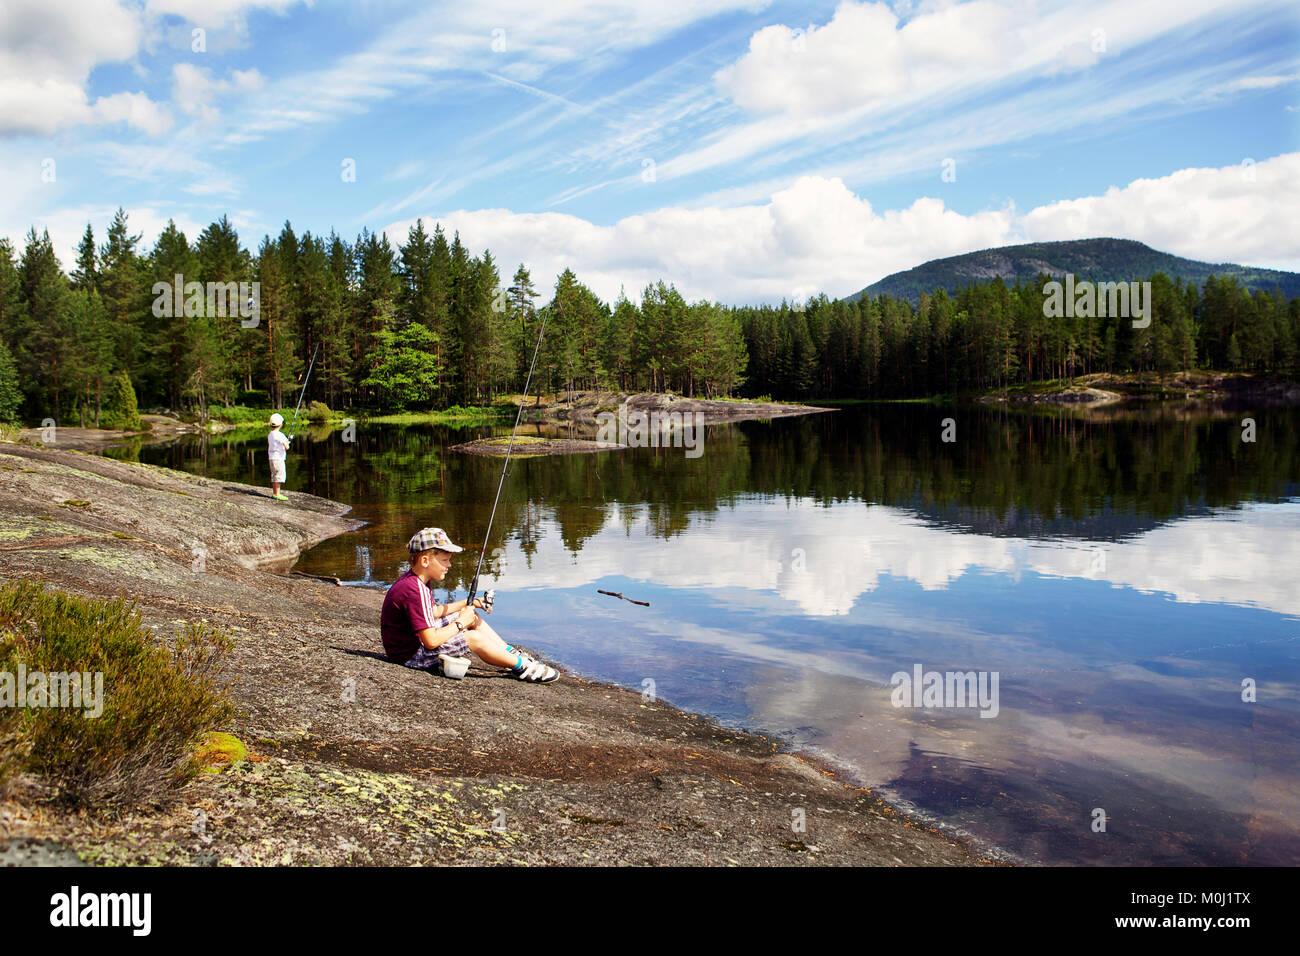 Two boys sitting on a scenic lake shore and fishing, Norway. Stock Photo